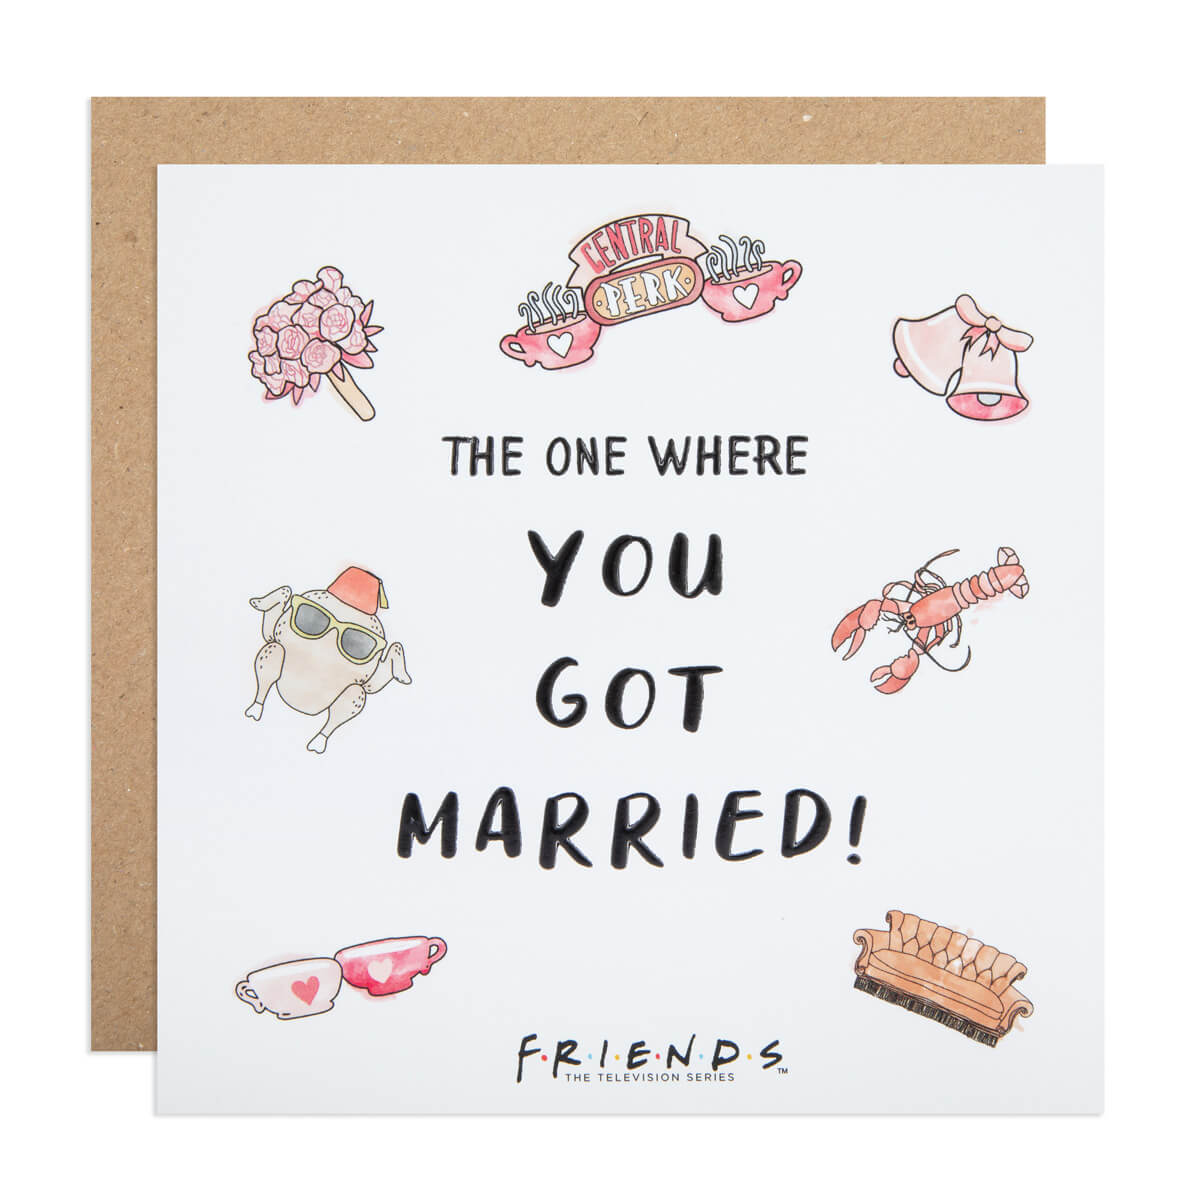 Friends TV Show Wedding Card For Couple - The card reads 'The One Where You Got Married!'